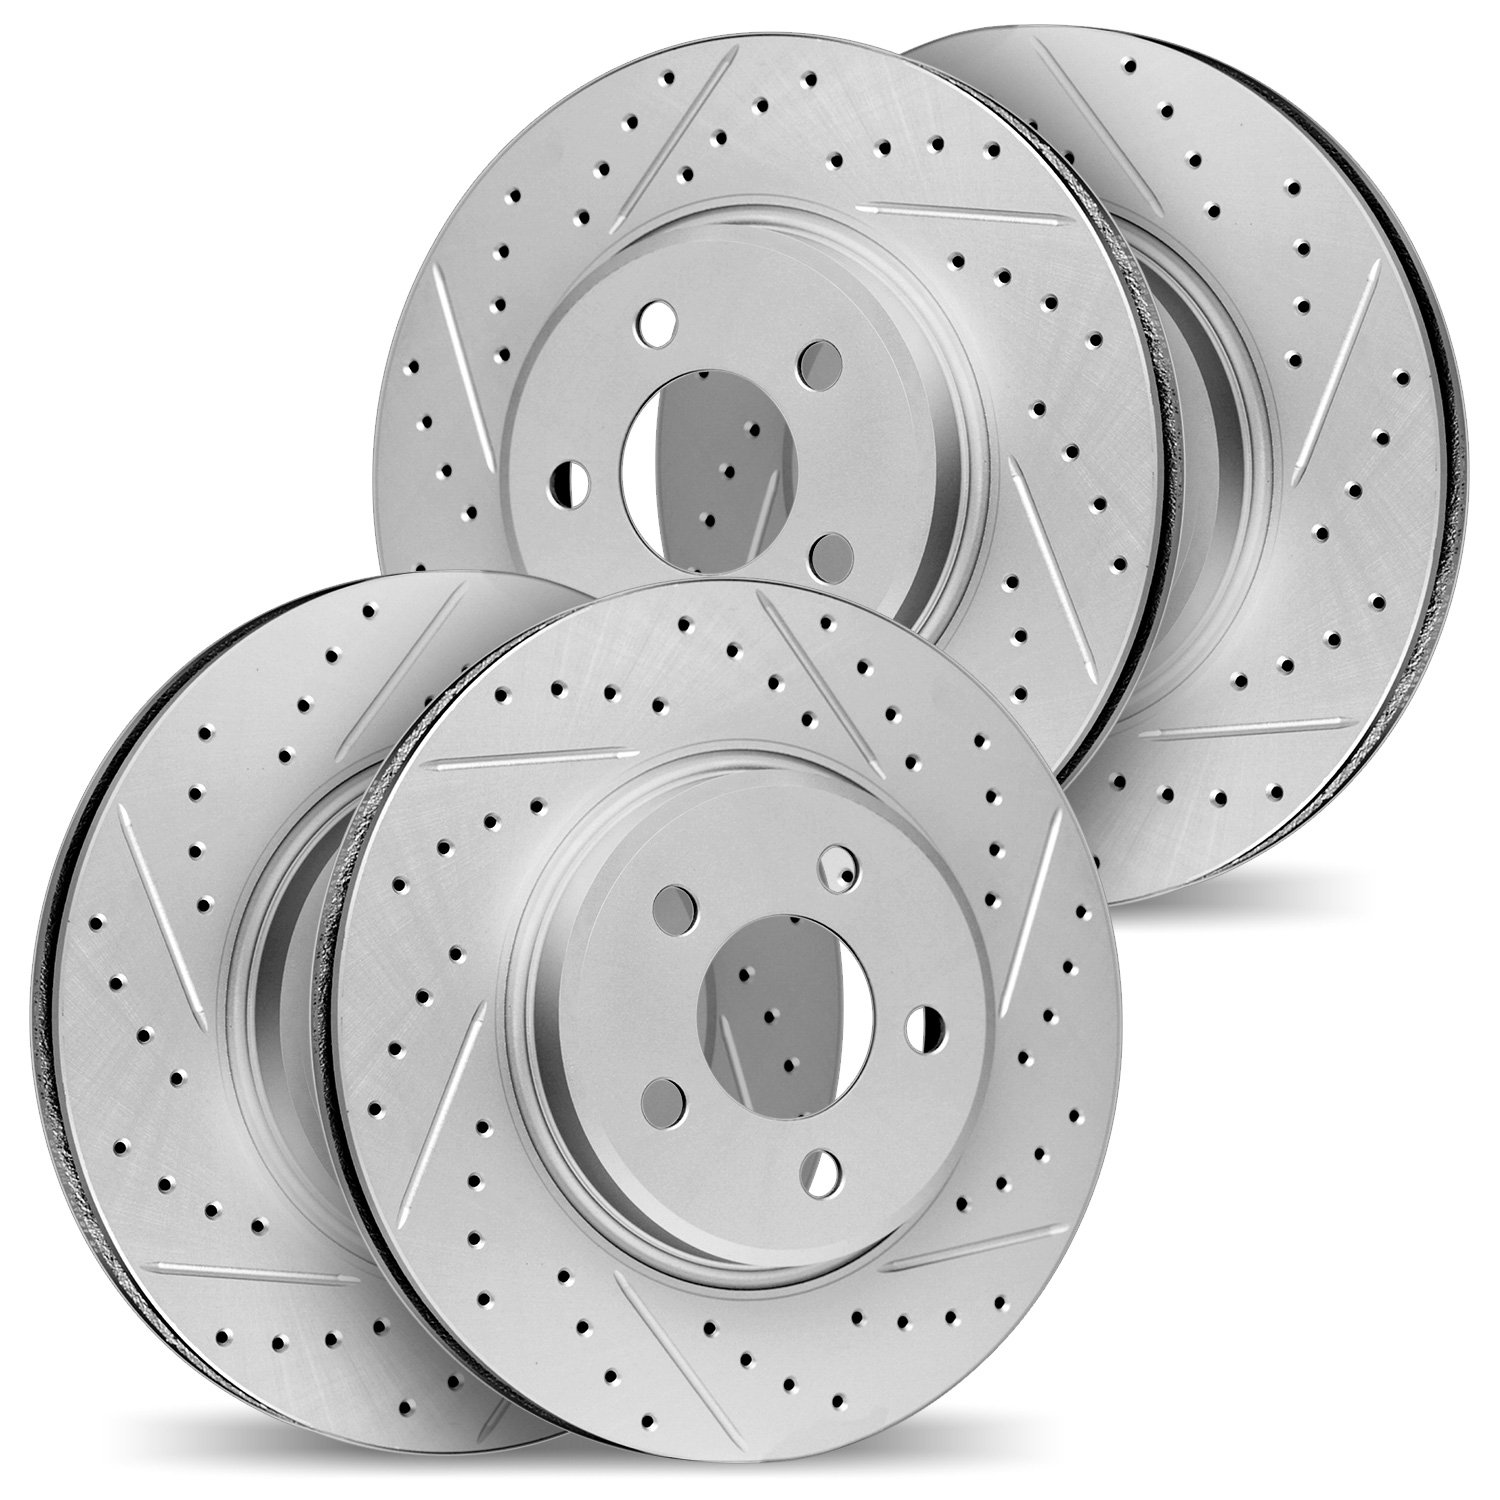 2004-31027 Geoperformance Drilled/Slotted Brake Rotors, Fits Select Multiple Makes/Models, Position: Front and Rear